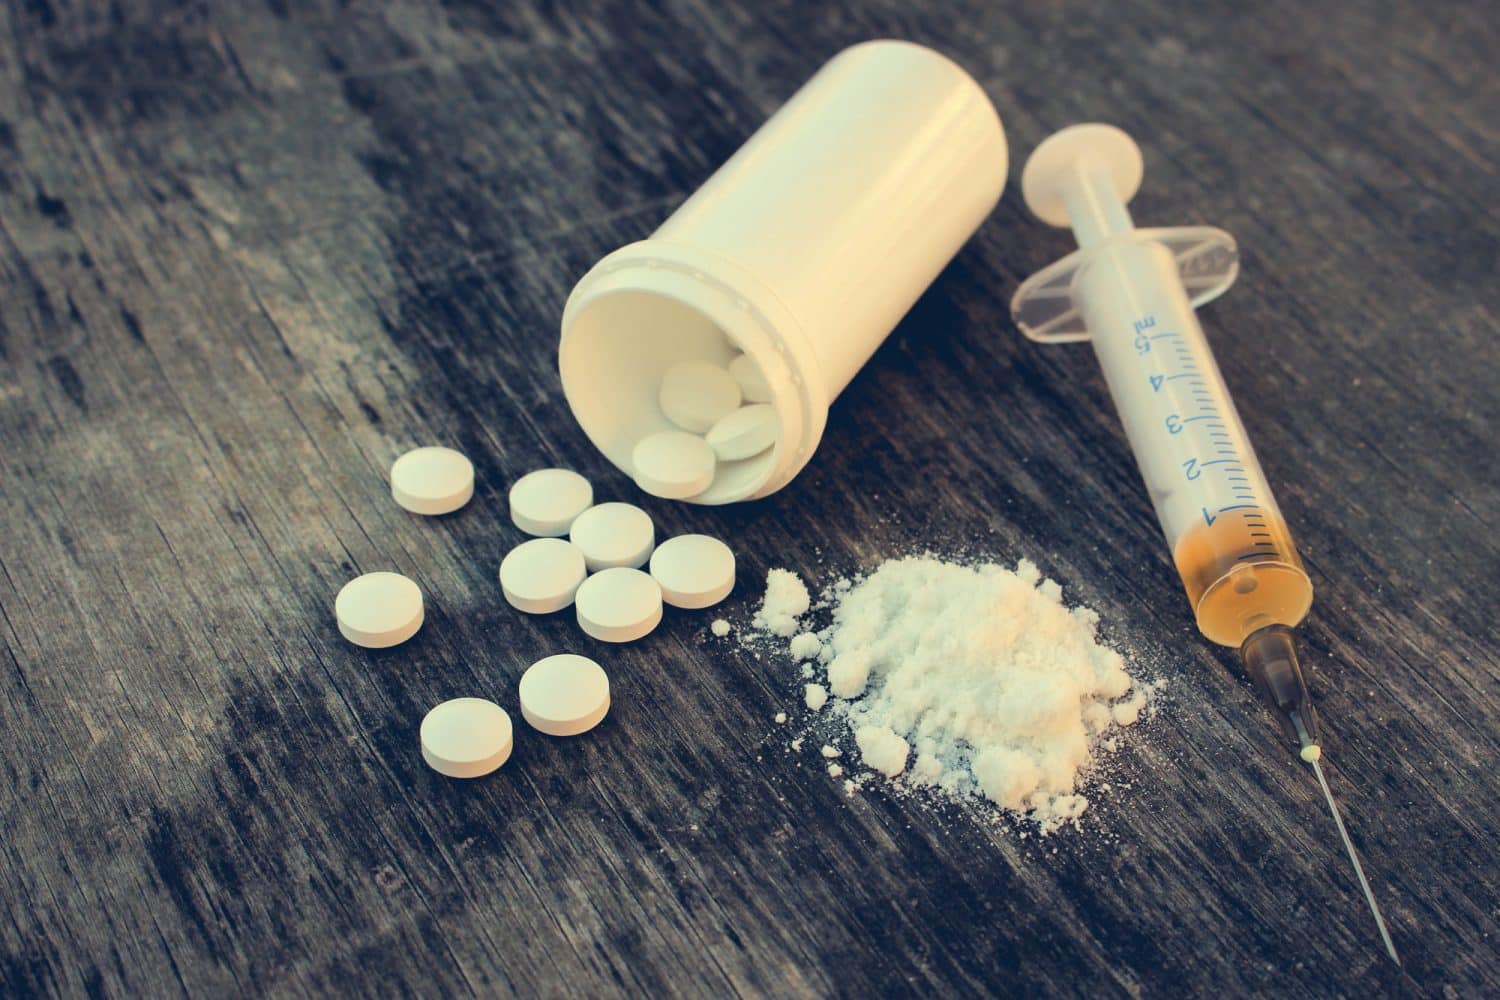 11 Common Ways to Tell if Someone is on Drugs and Needs Help